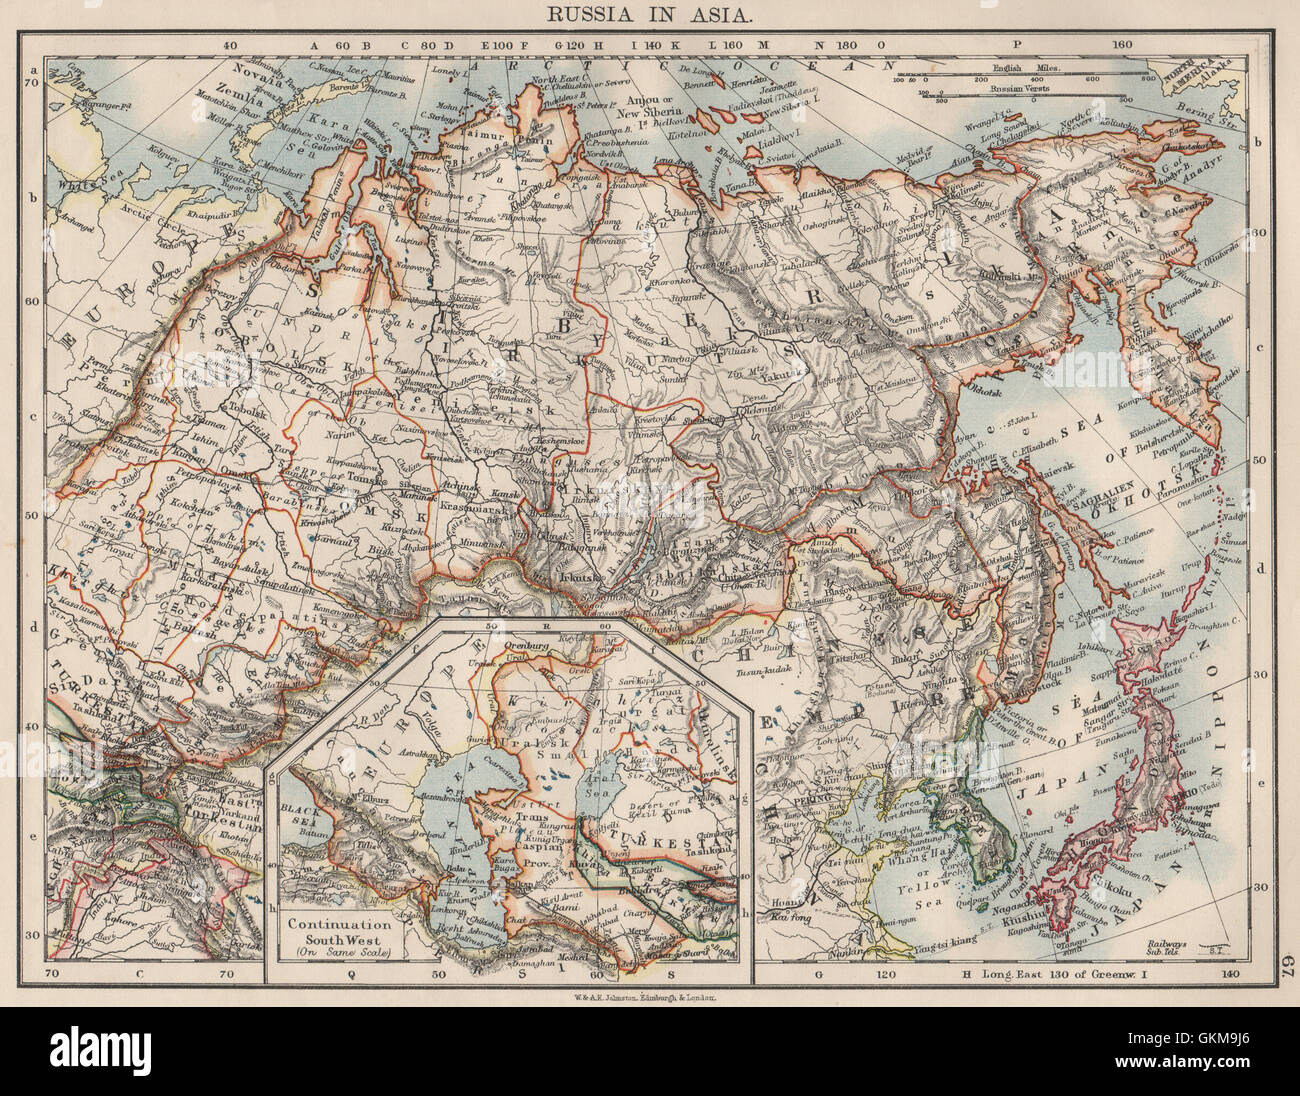 RUSSIA IN ASIA. Shows Trans-Siberian railway under construction , 1900 old map Stock Photo